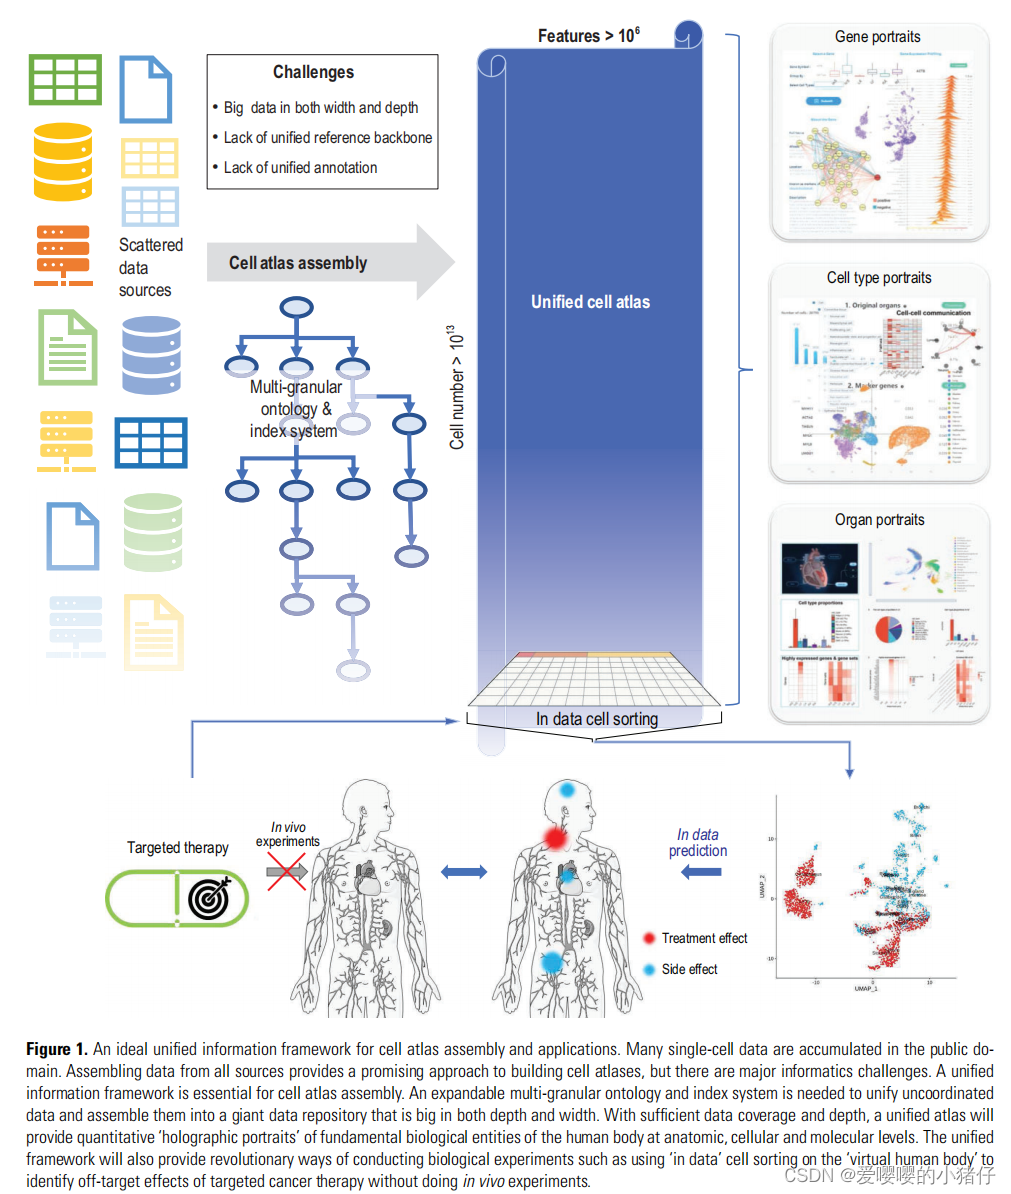 Toward a unified information framework for cell atlas assembly论文笔记